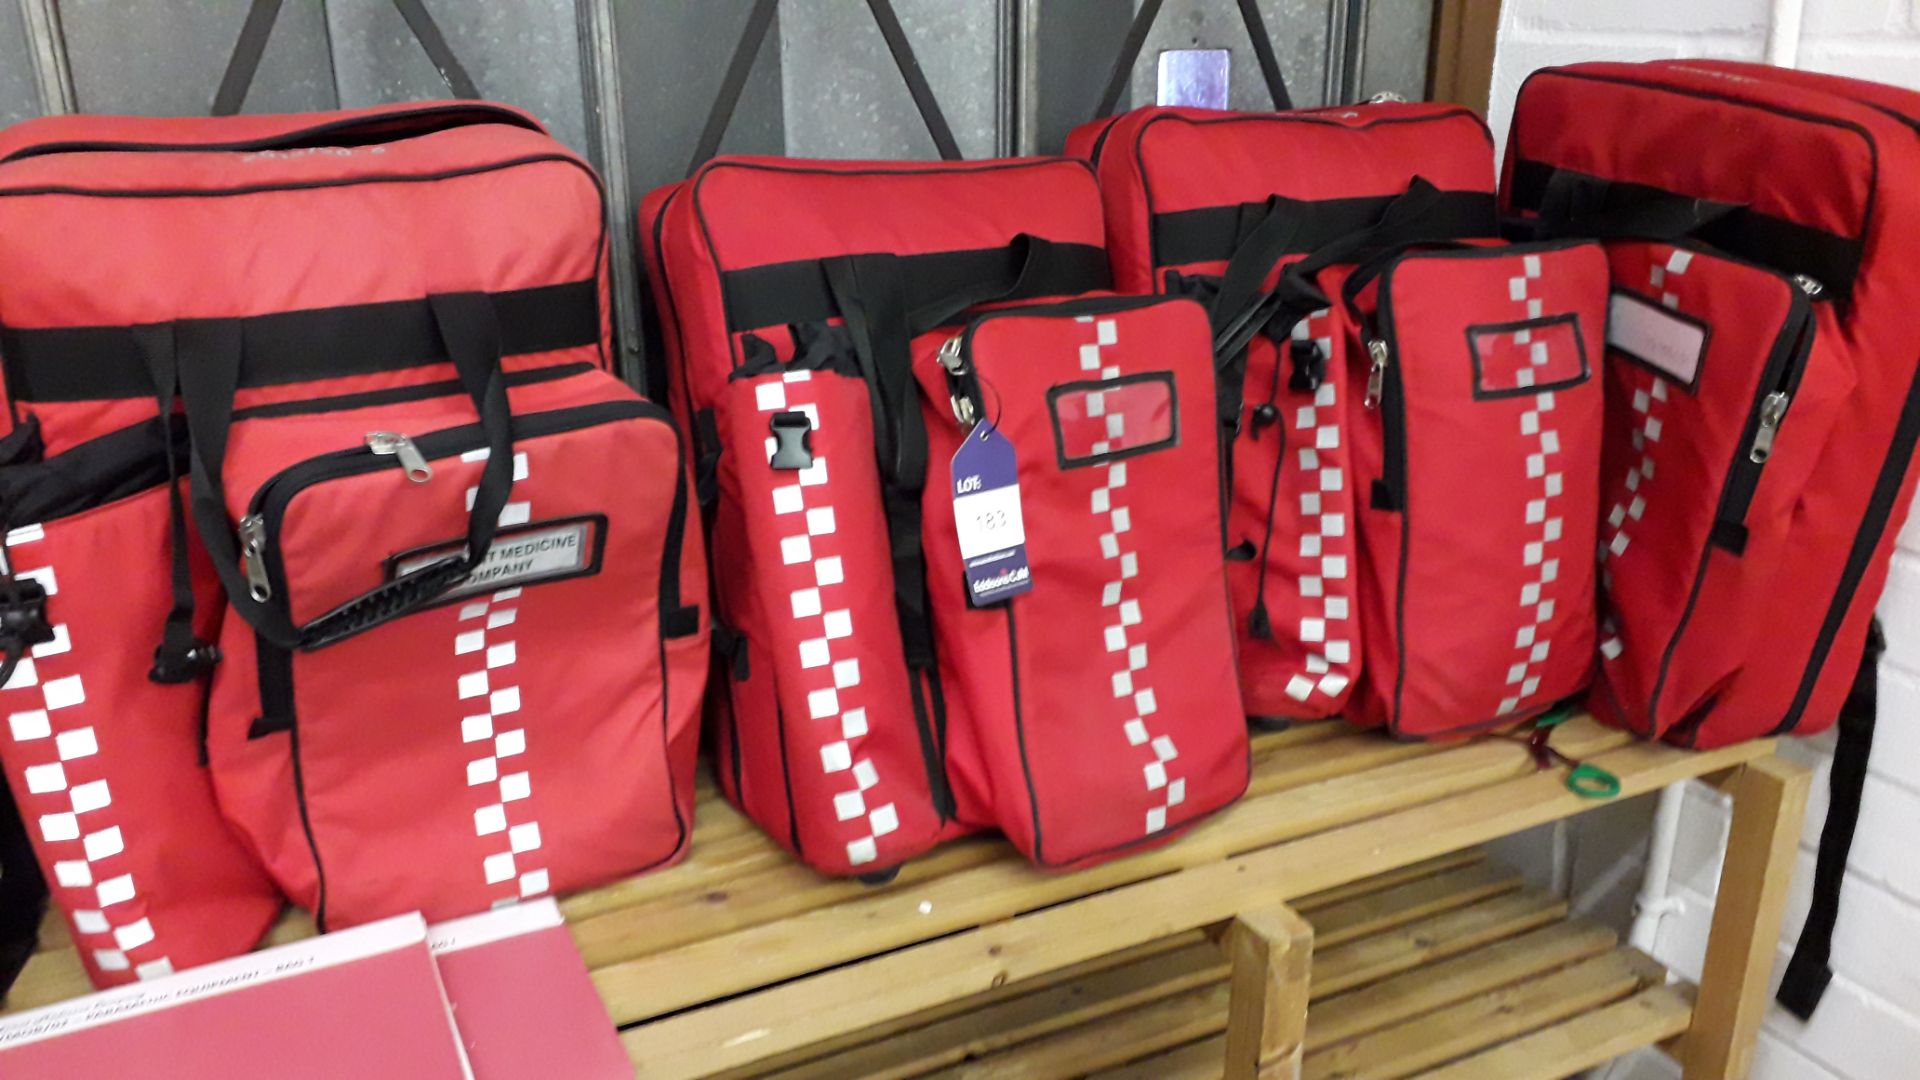 4 x Kitted major Incident Response Bags